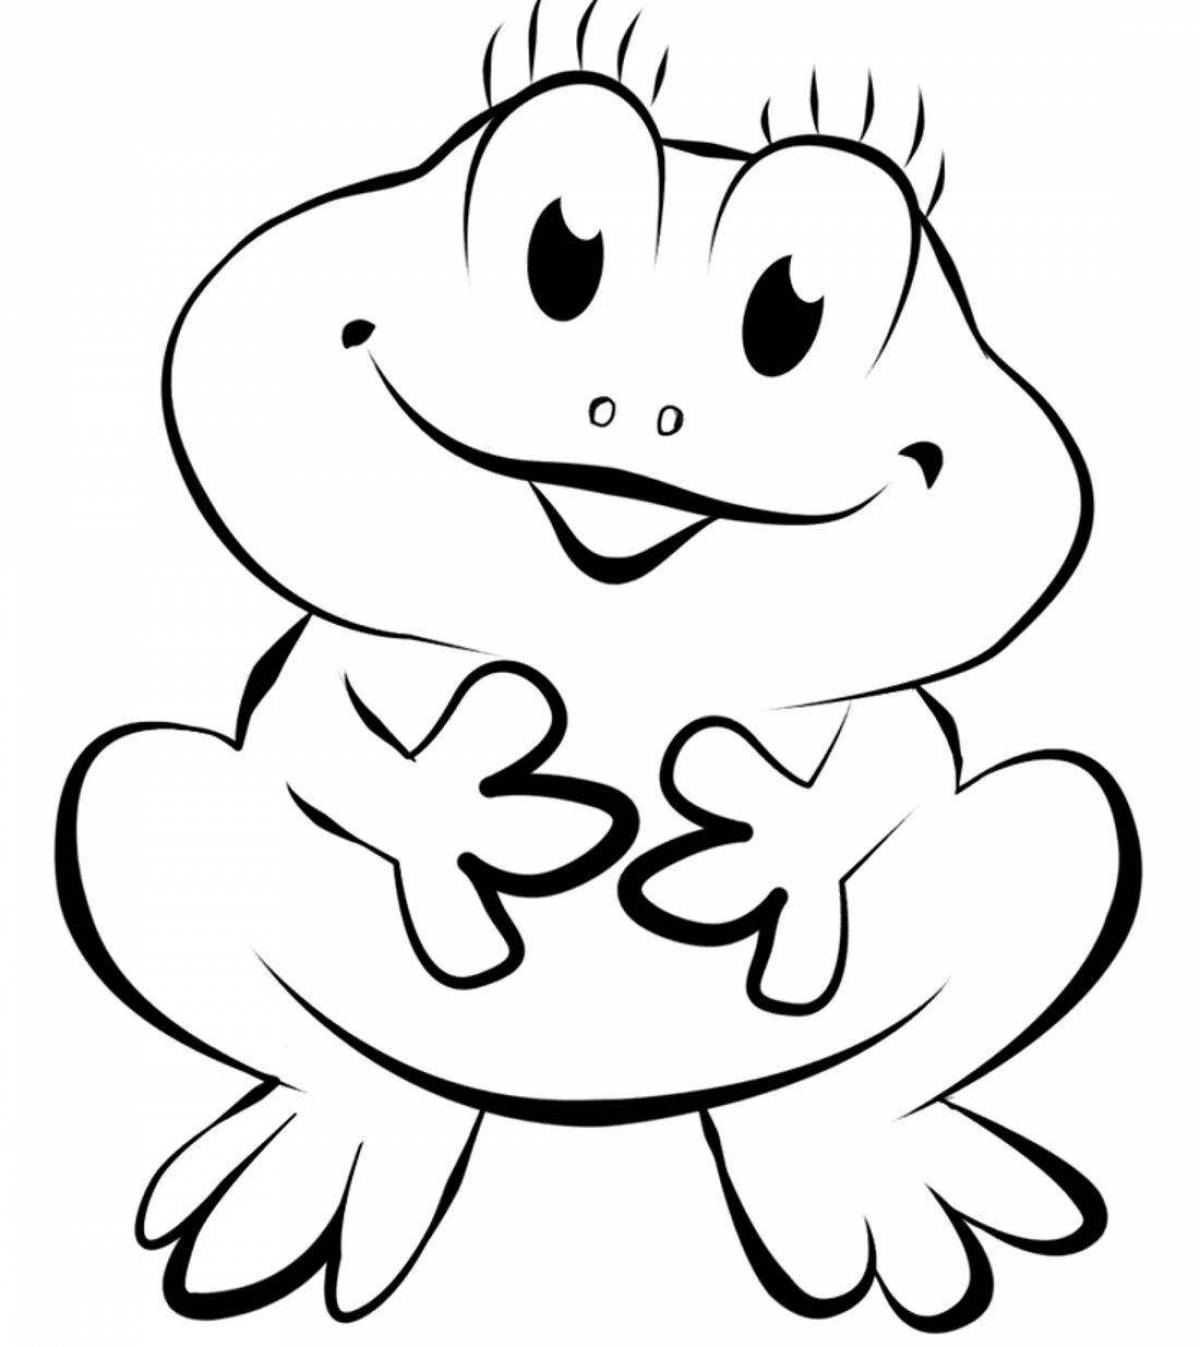 Vibrant frog coloring page